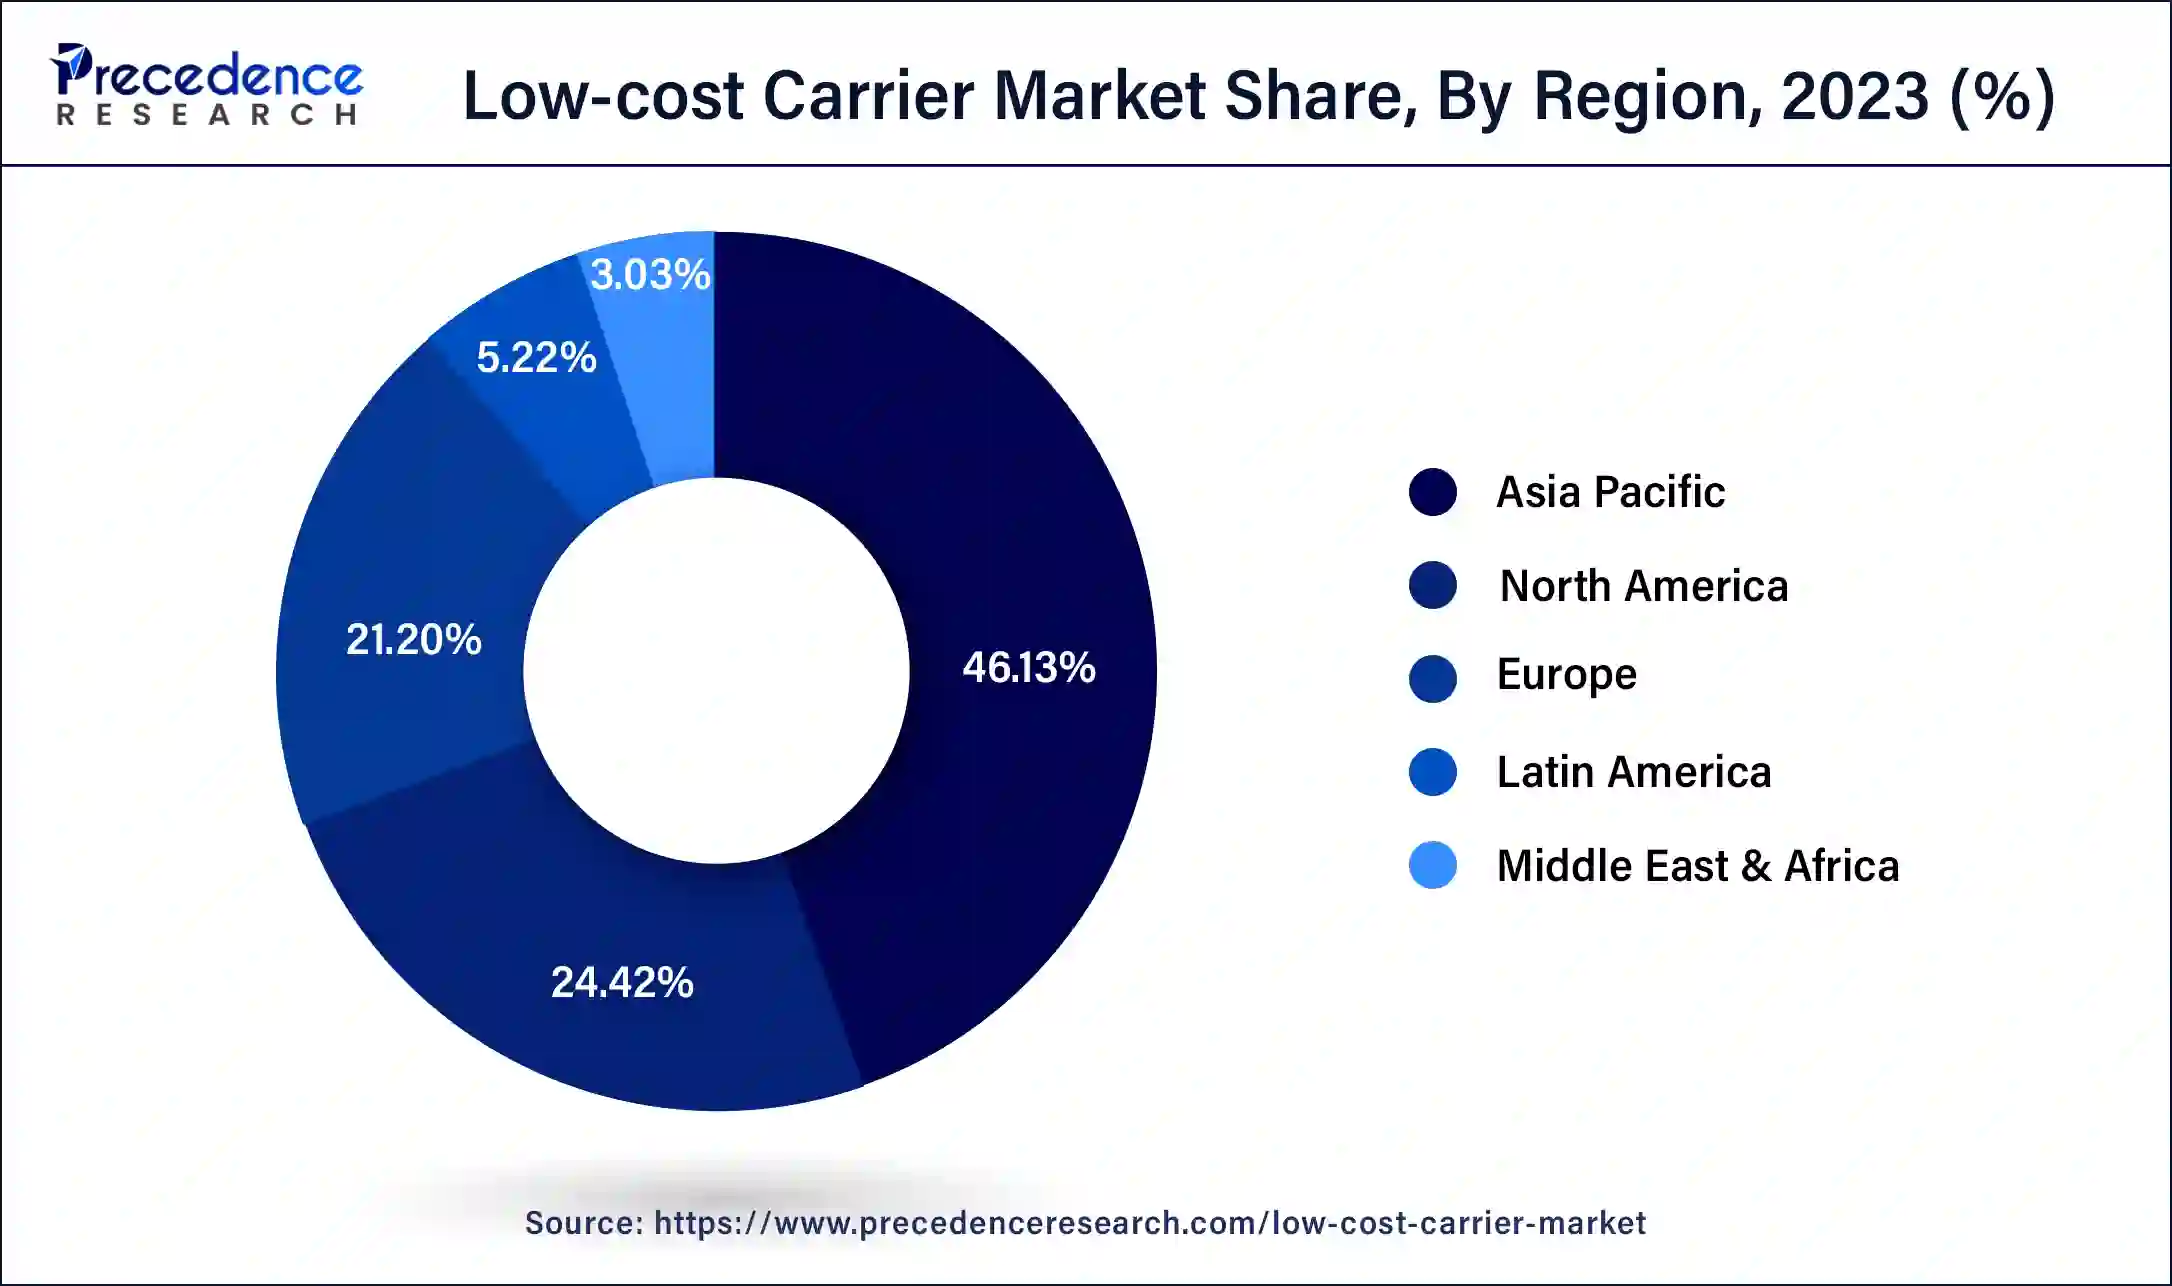 Low-cost Carrier Market Share, By Region, 2023 (%)